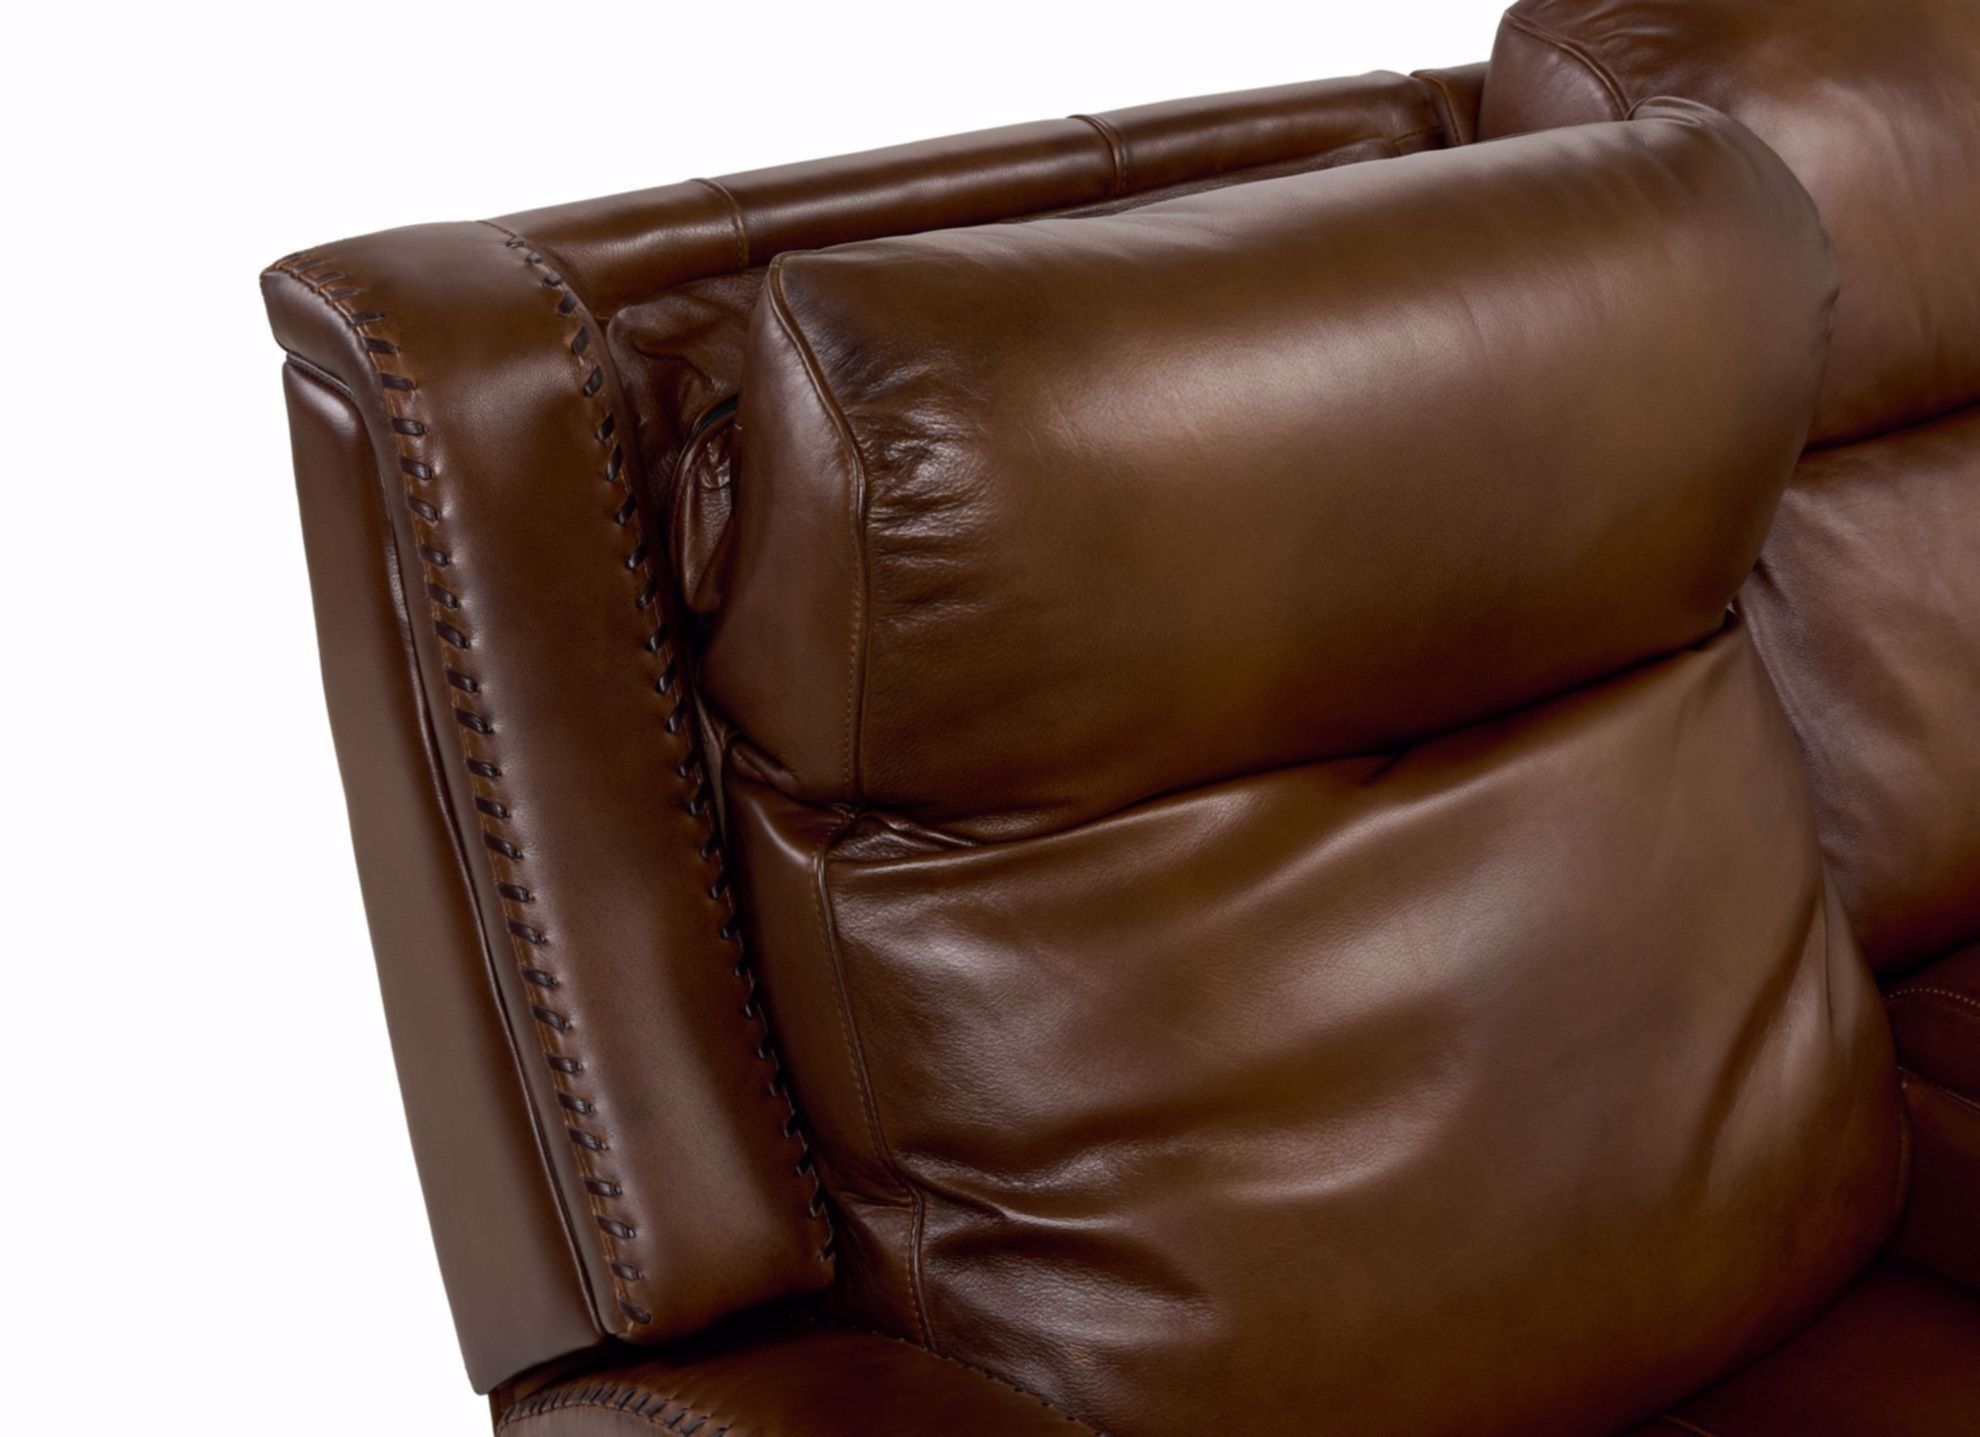 Picture of Mustang Power Reclining Sofa